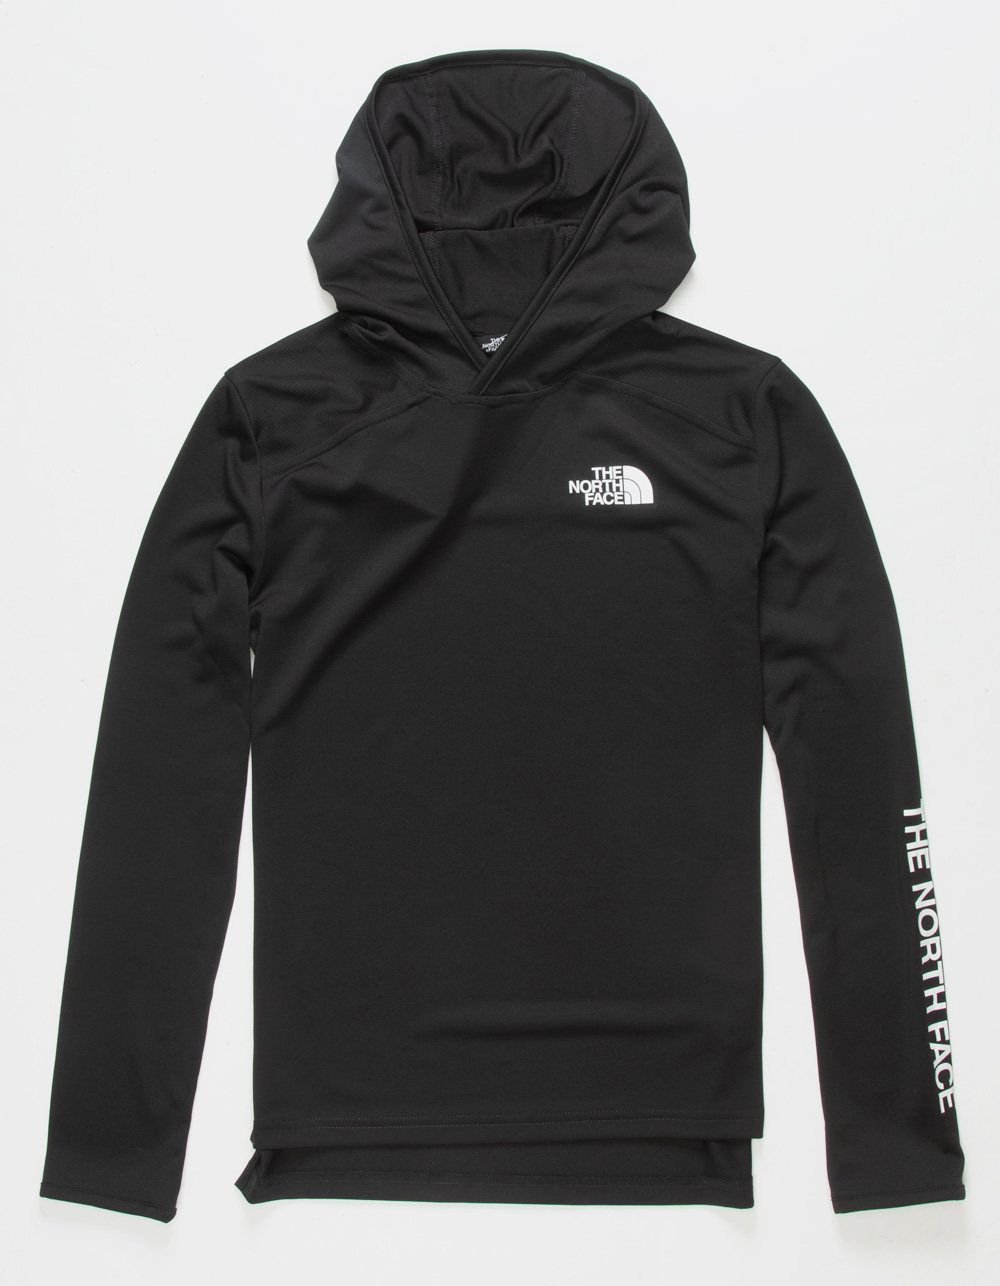 The North Face Clothing & Apparel | Tillys